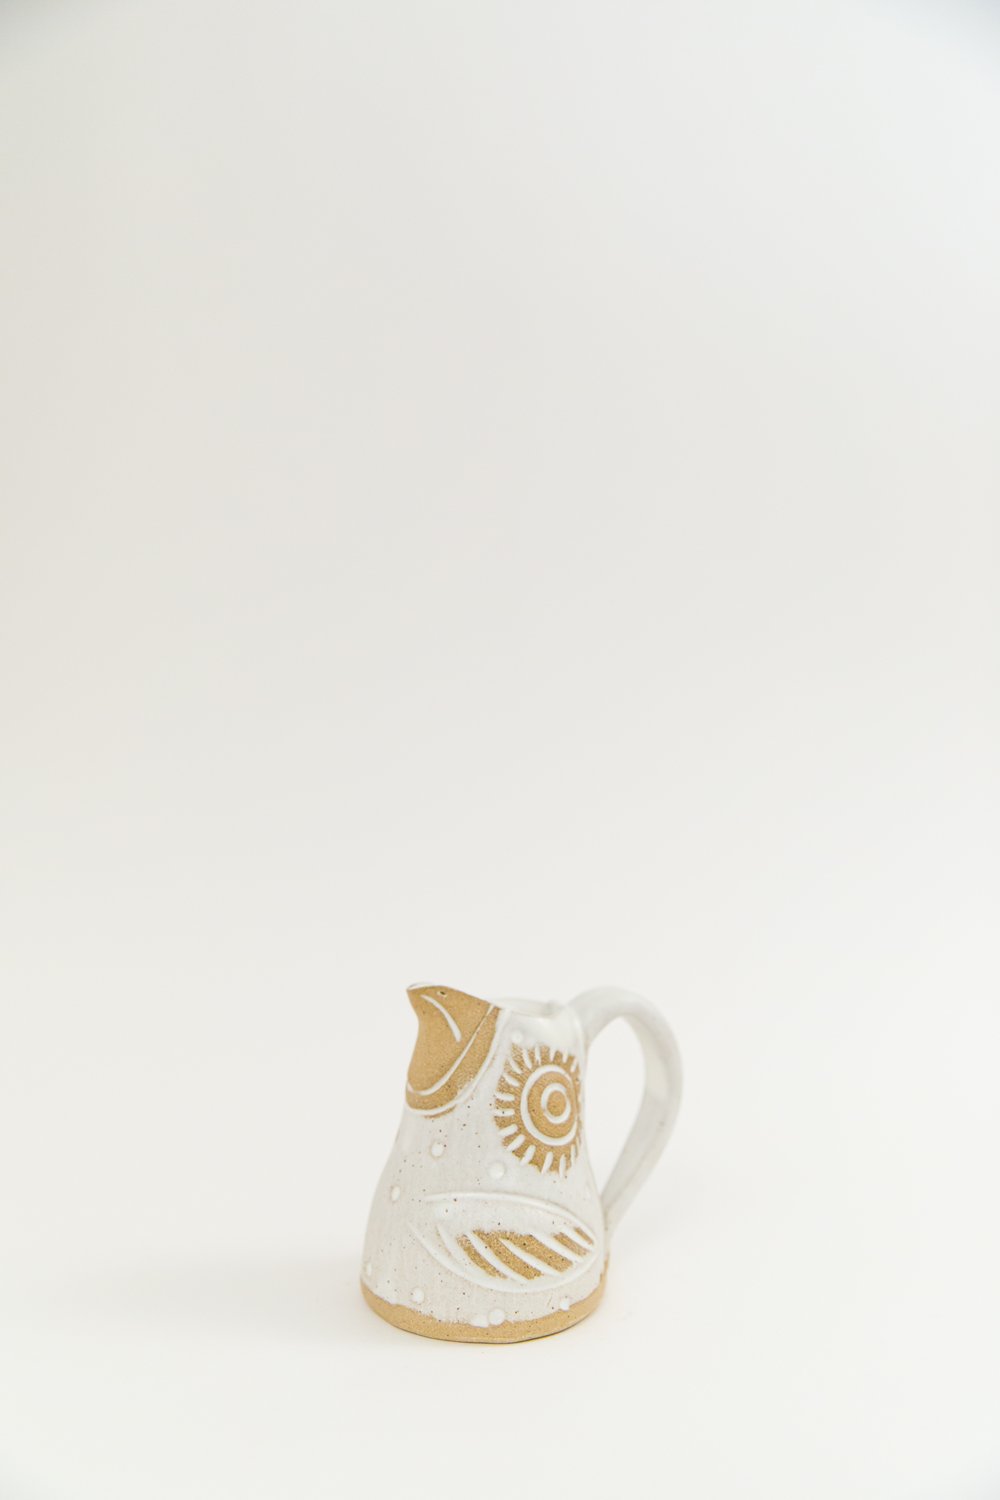 Image of Matte White Baby Owl Creamer with Handle